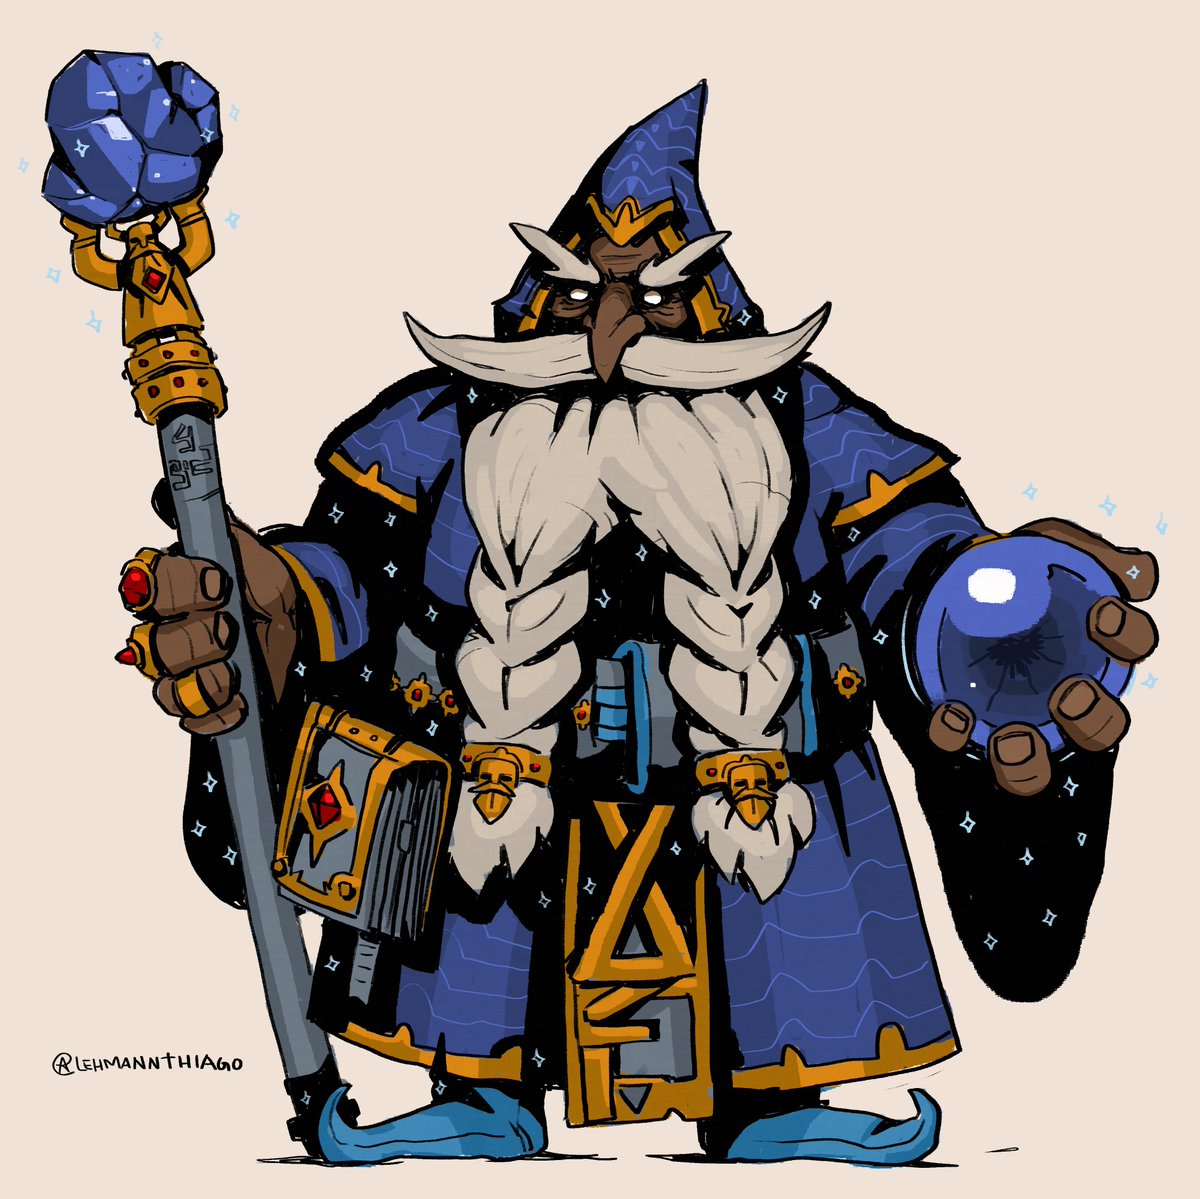 「another 1 hour dwarf, needs a name 」|Thiago Lehmann (2Minds)のイラスト